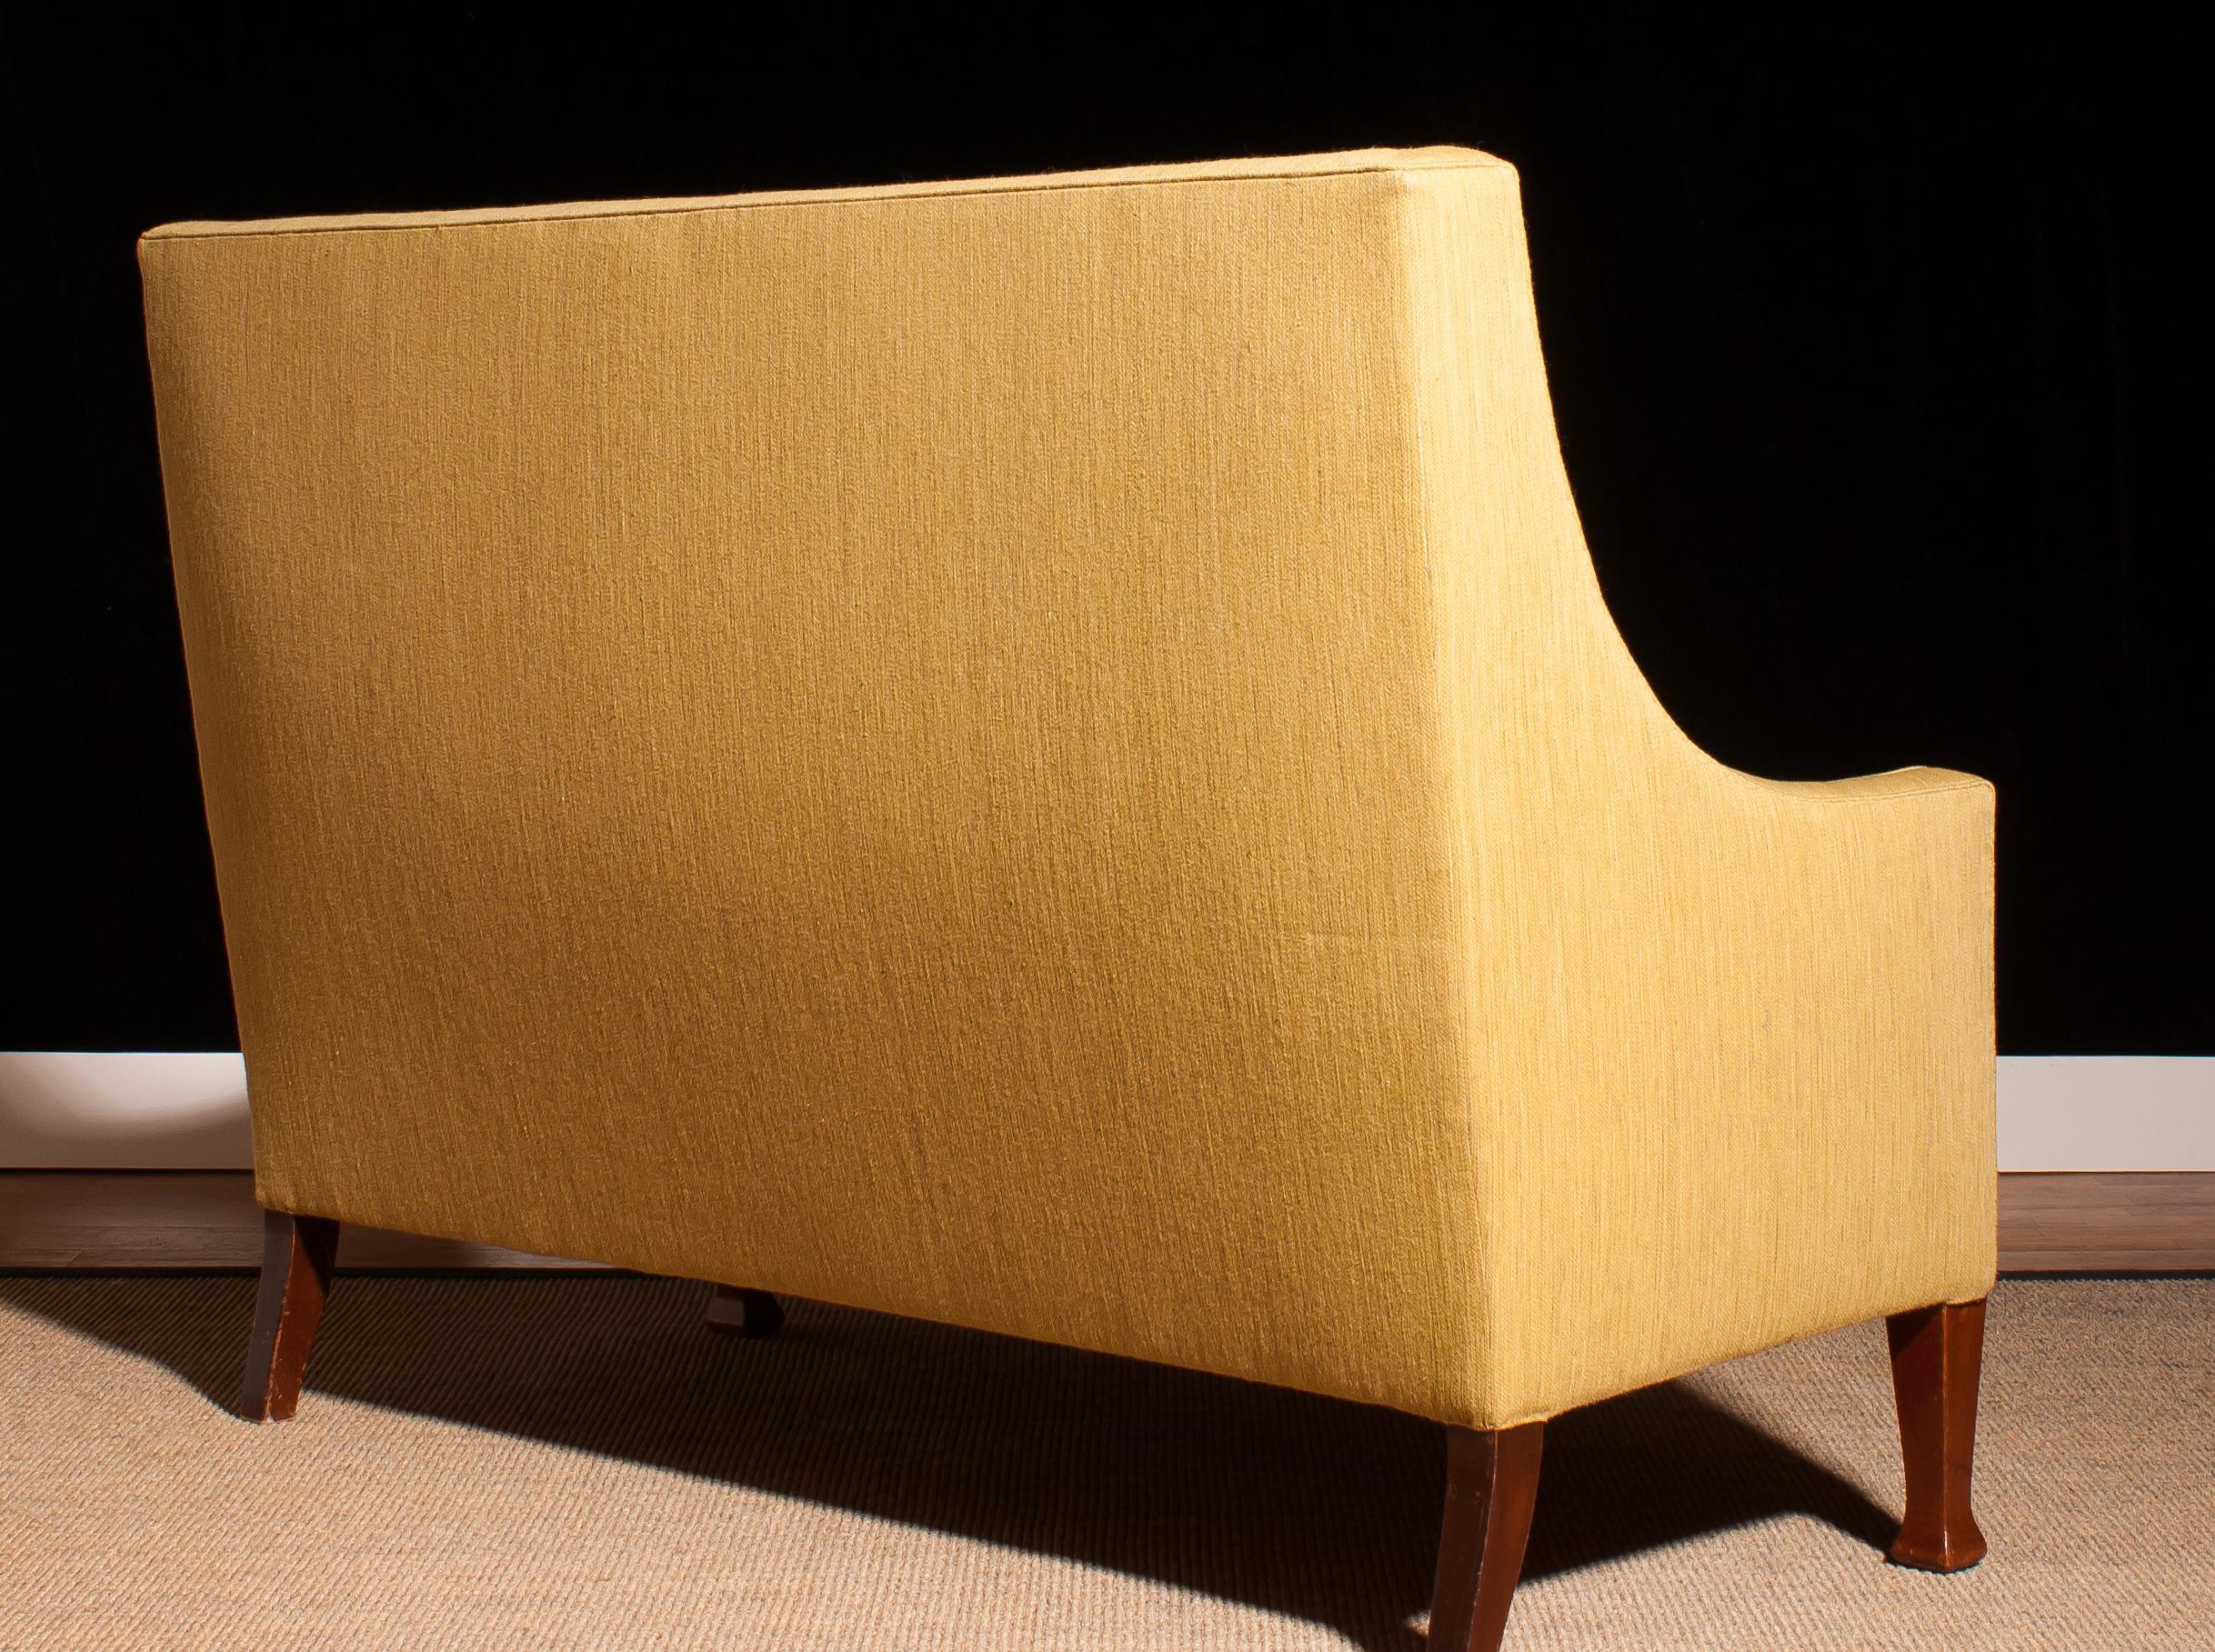 Beautiful high back sofa couch made in Denmark.
The sofa is made of a light yellow fabric on a wooden frame.
It is in a wonderful original condition,
period 1950s.
Dimensions: H 108 cm, W 148 cm, D 75 cm, SH 46 cm.